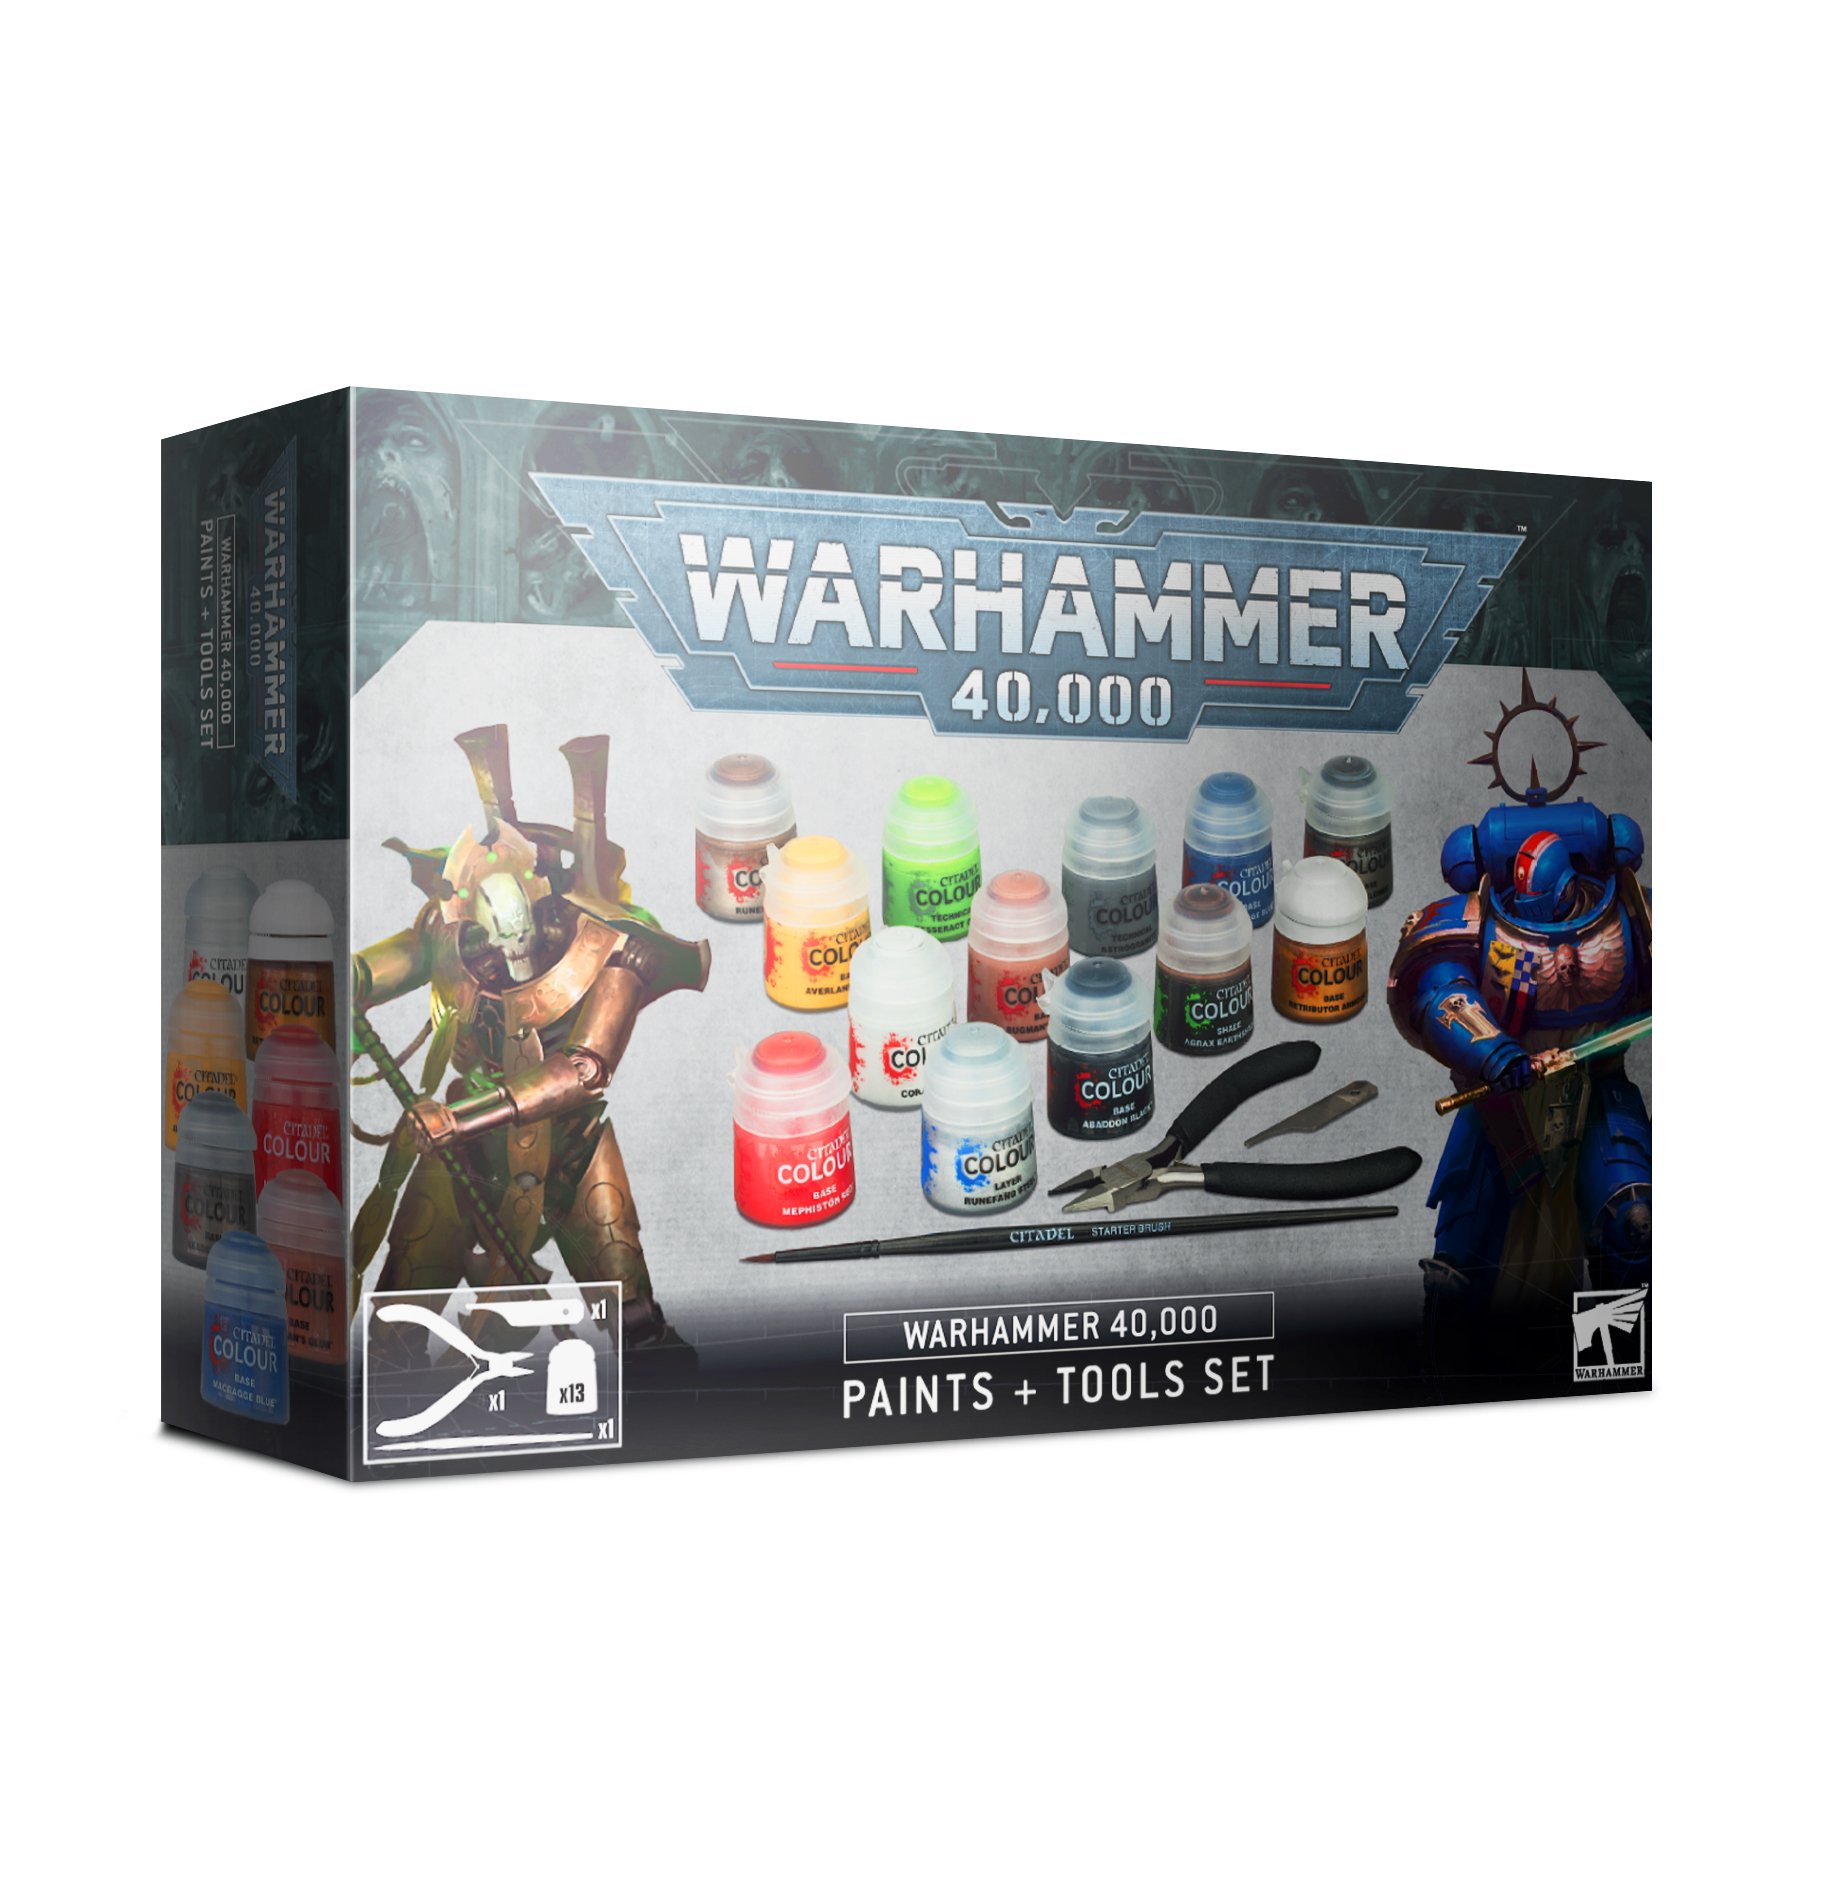 Warhammer 40,000 Paints and Tools